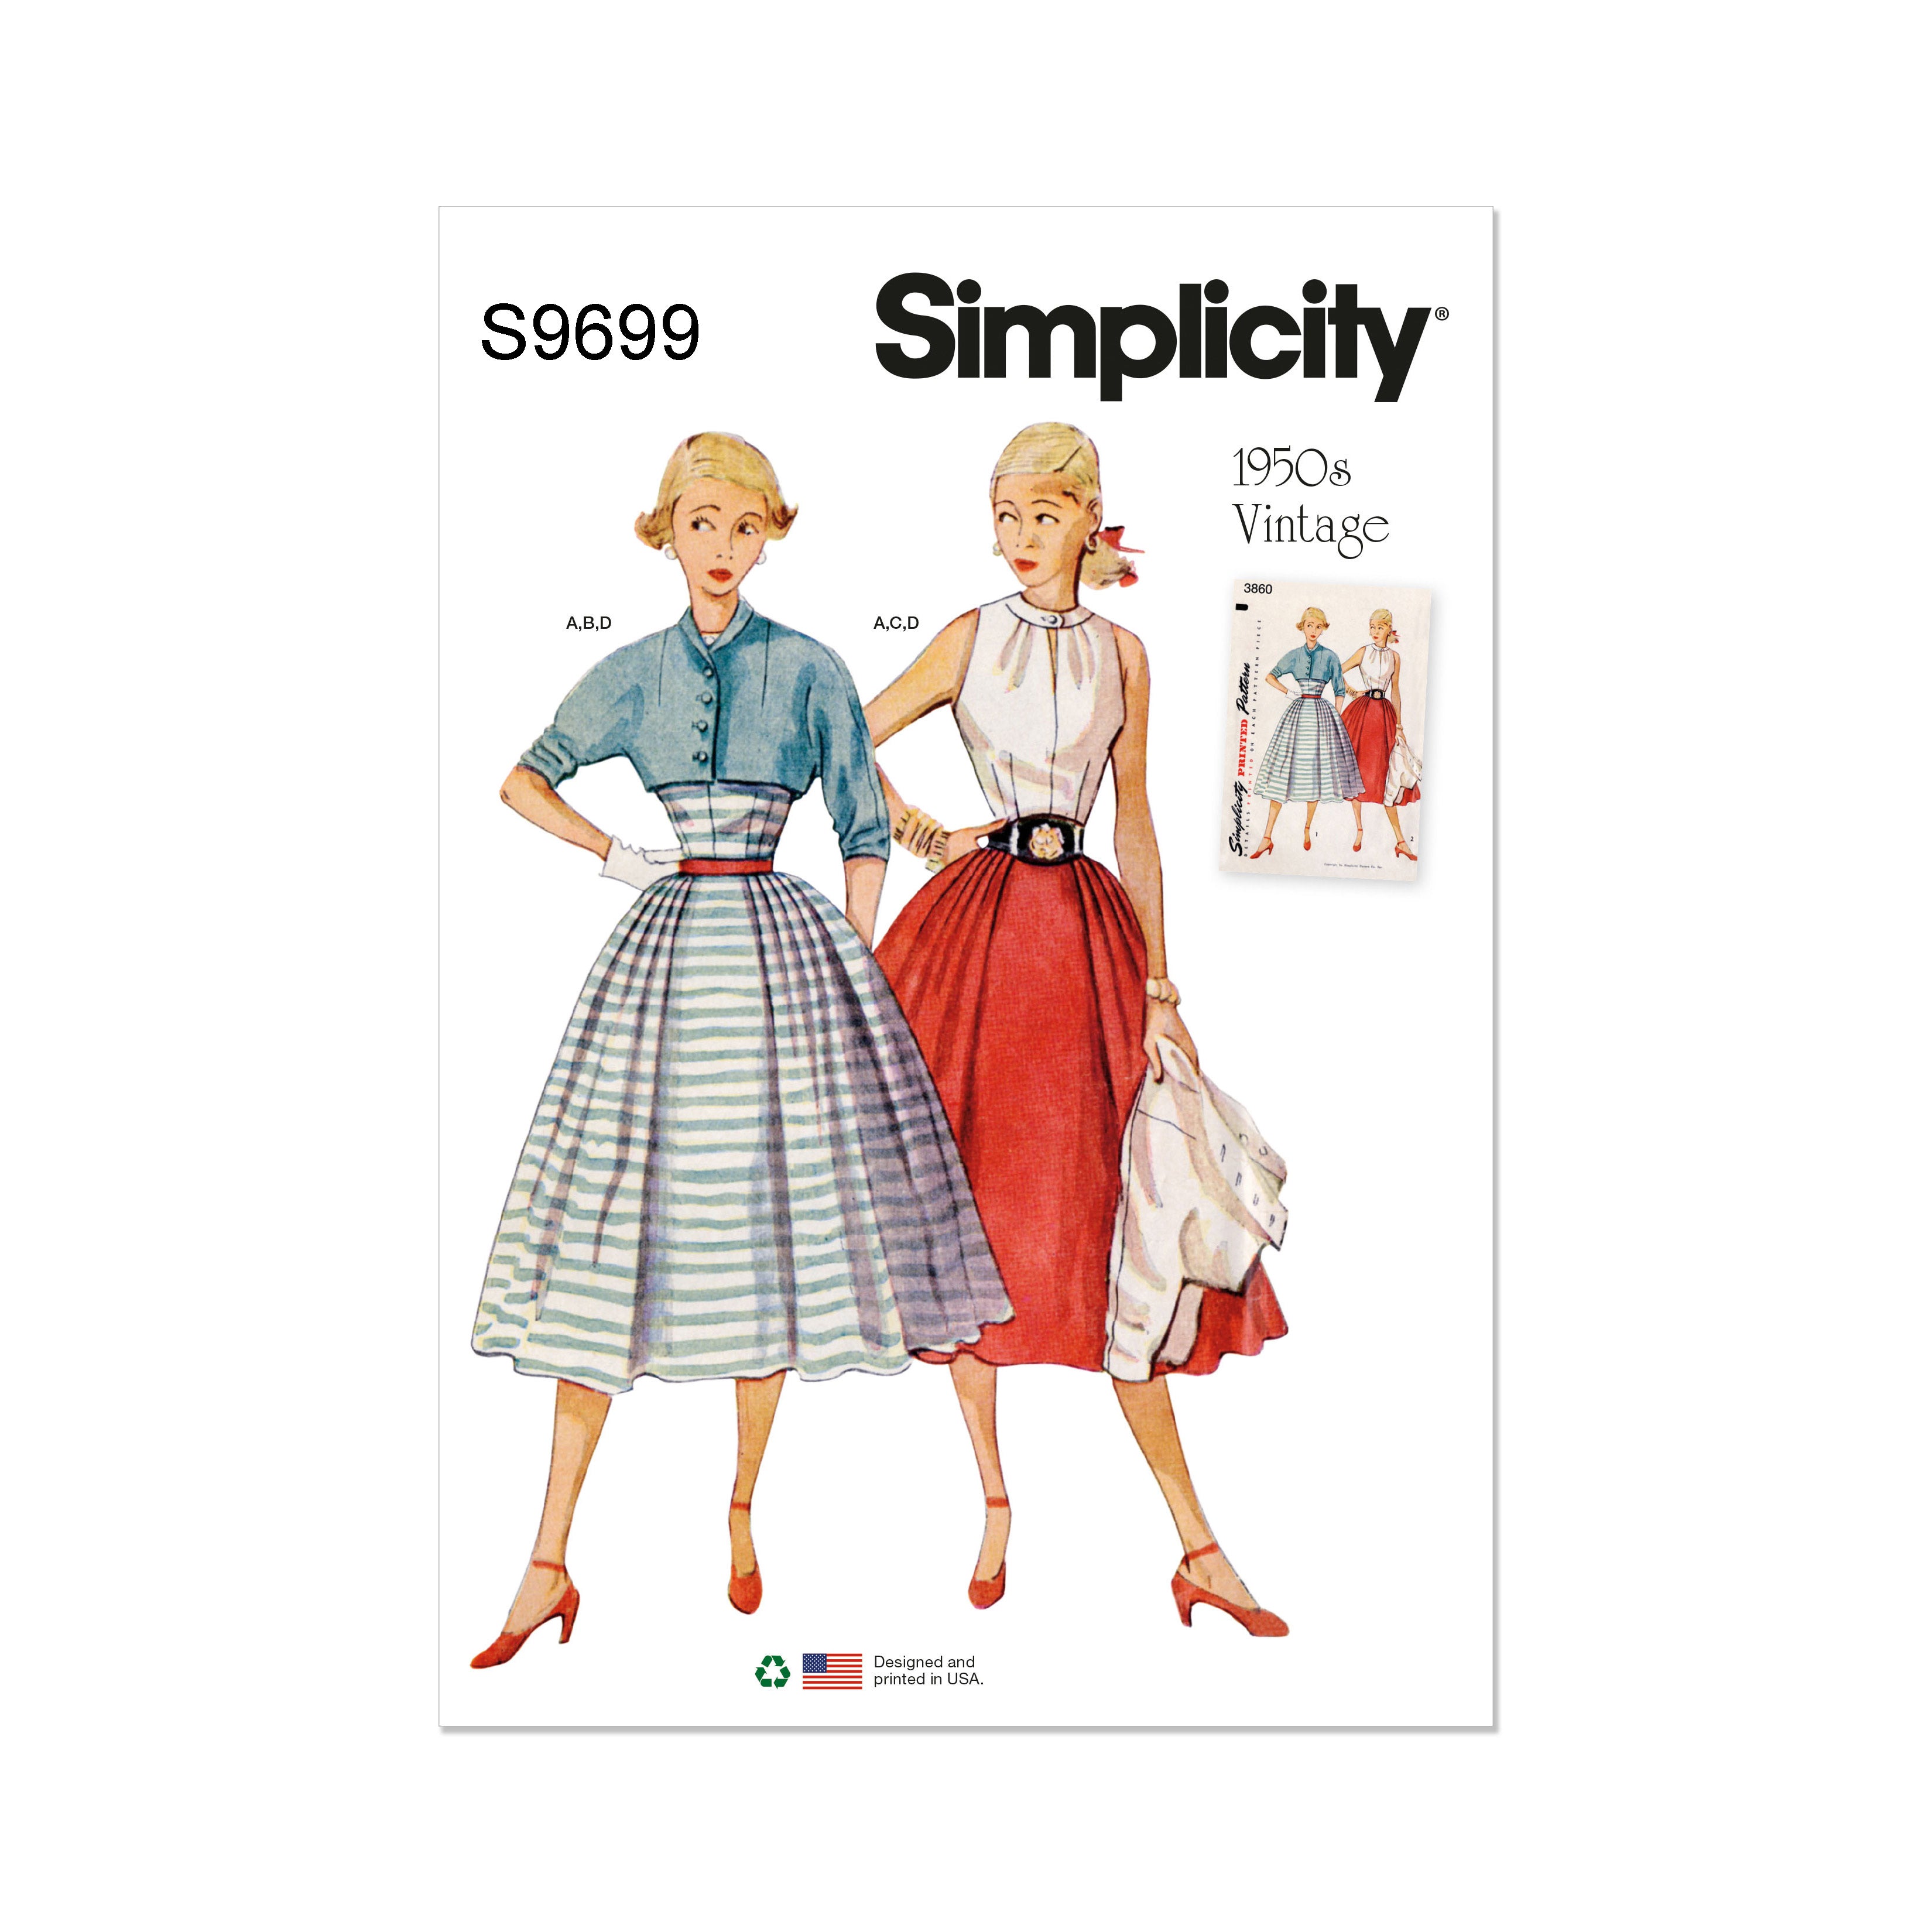 Simplicity 9699 Vintage Skirt, Blouse and Jacket Sewing pattern from Jaycotts Sewing Supplies